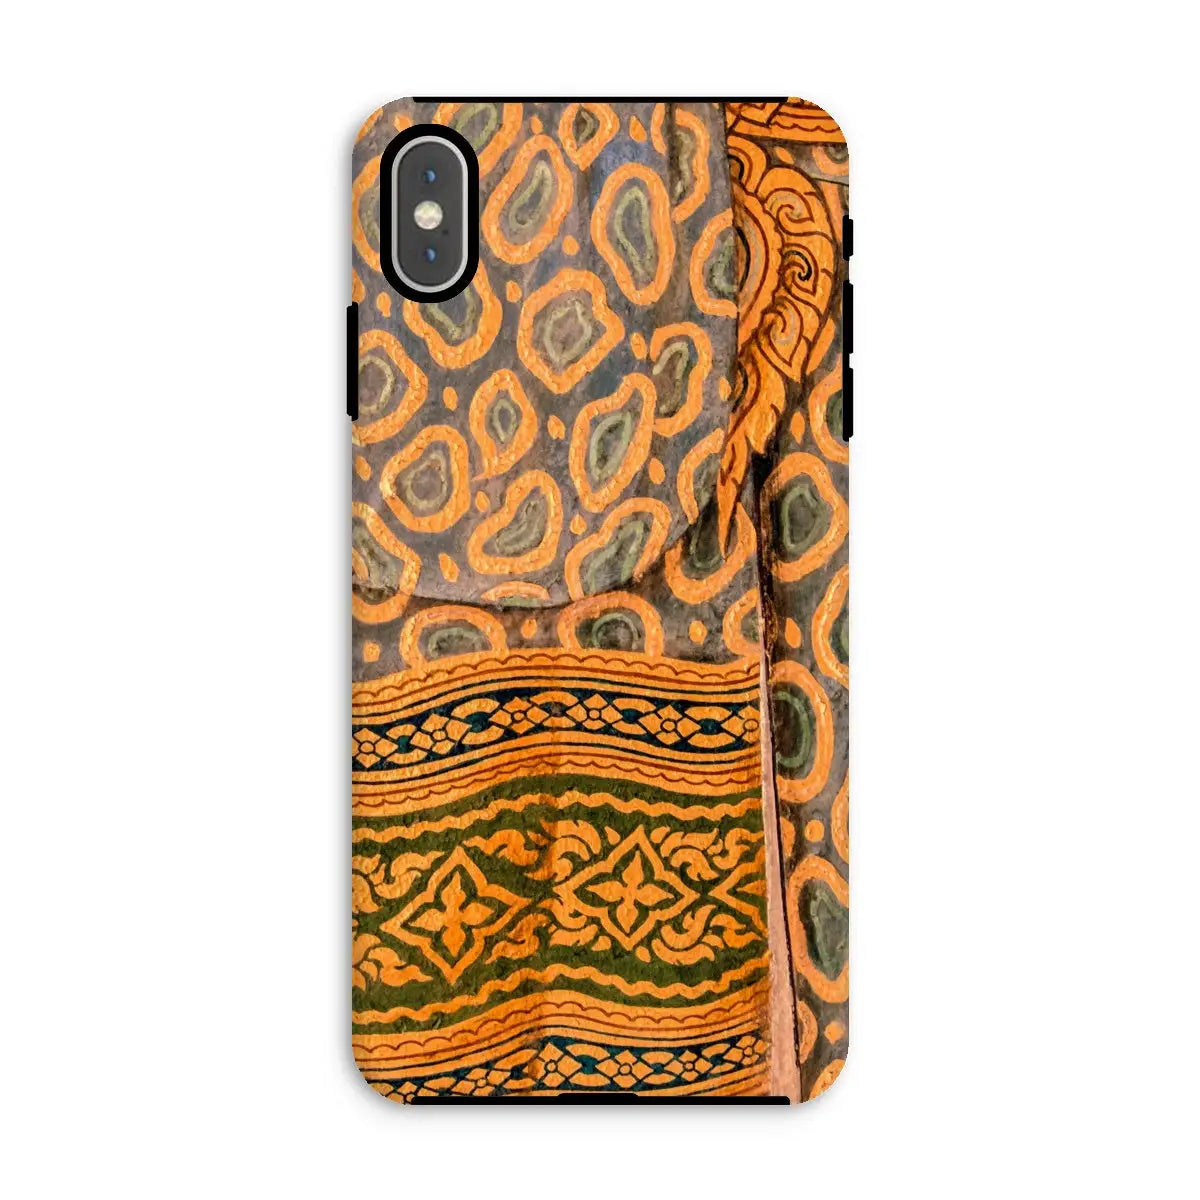 Lady In Waiting - Royal Siam Mural Art Phone Case - Iphone Xs Max / Matte - Mobile Phone Cases - Aesthetic Art